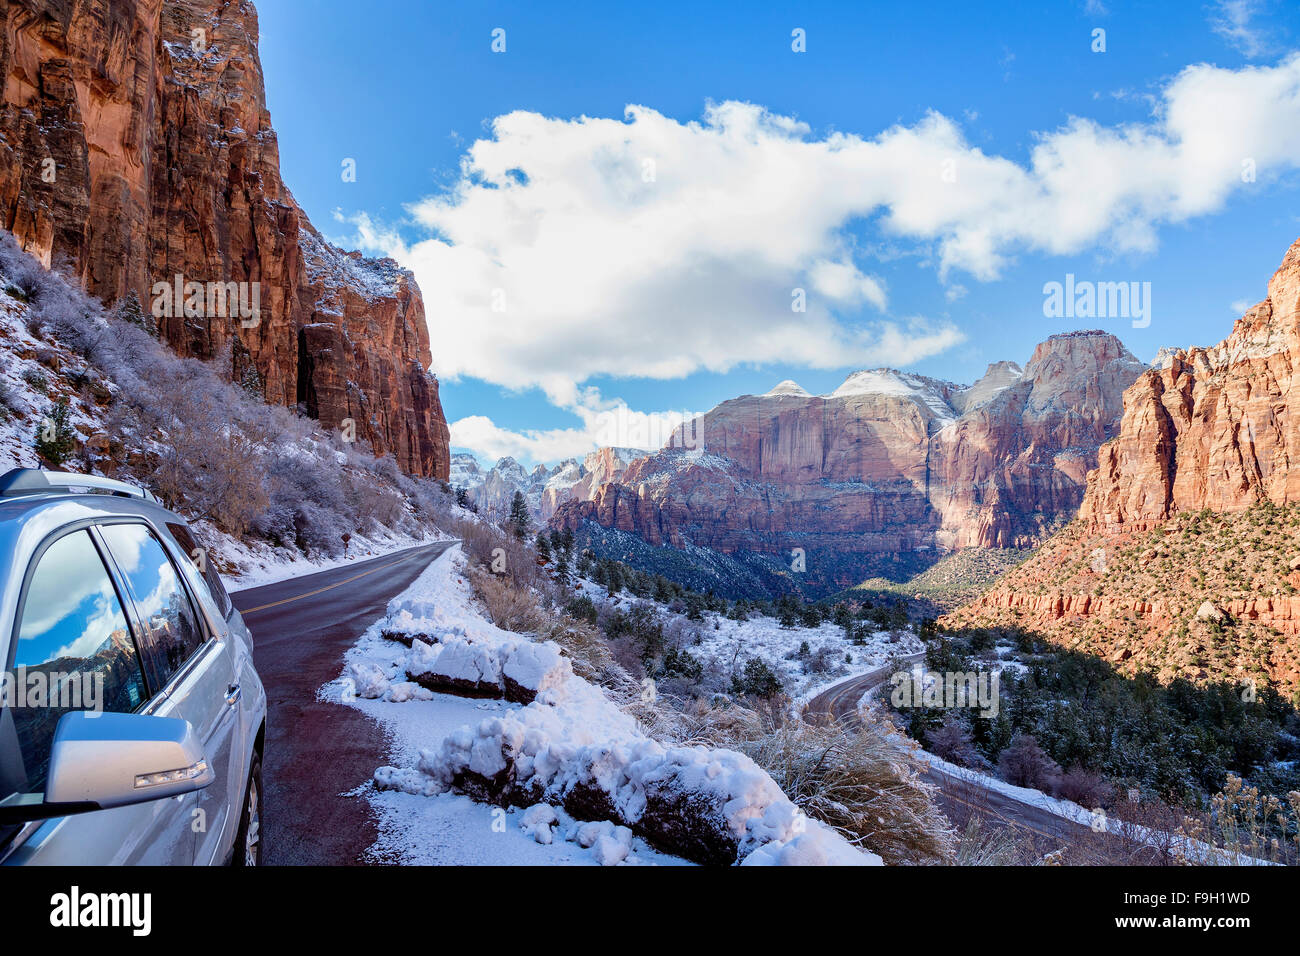 Car parked along Zion canyon scenic drive, Utah Stock Photo